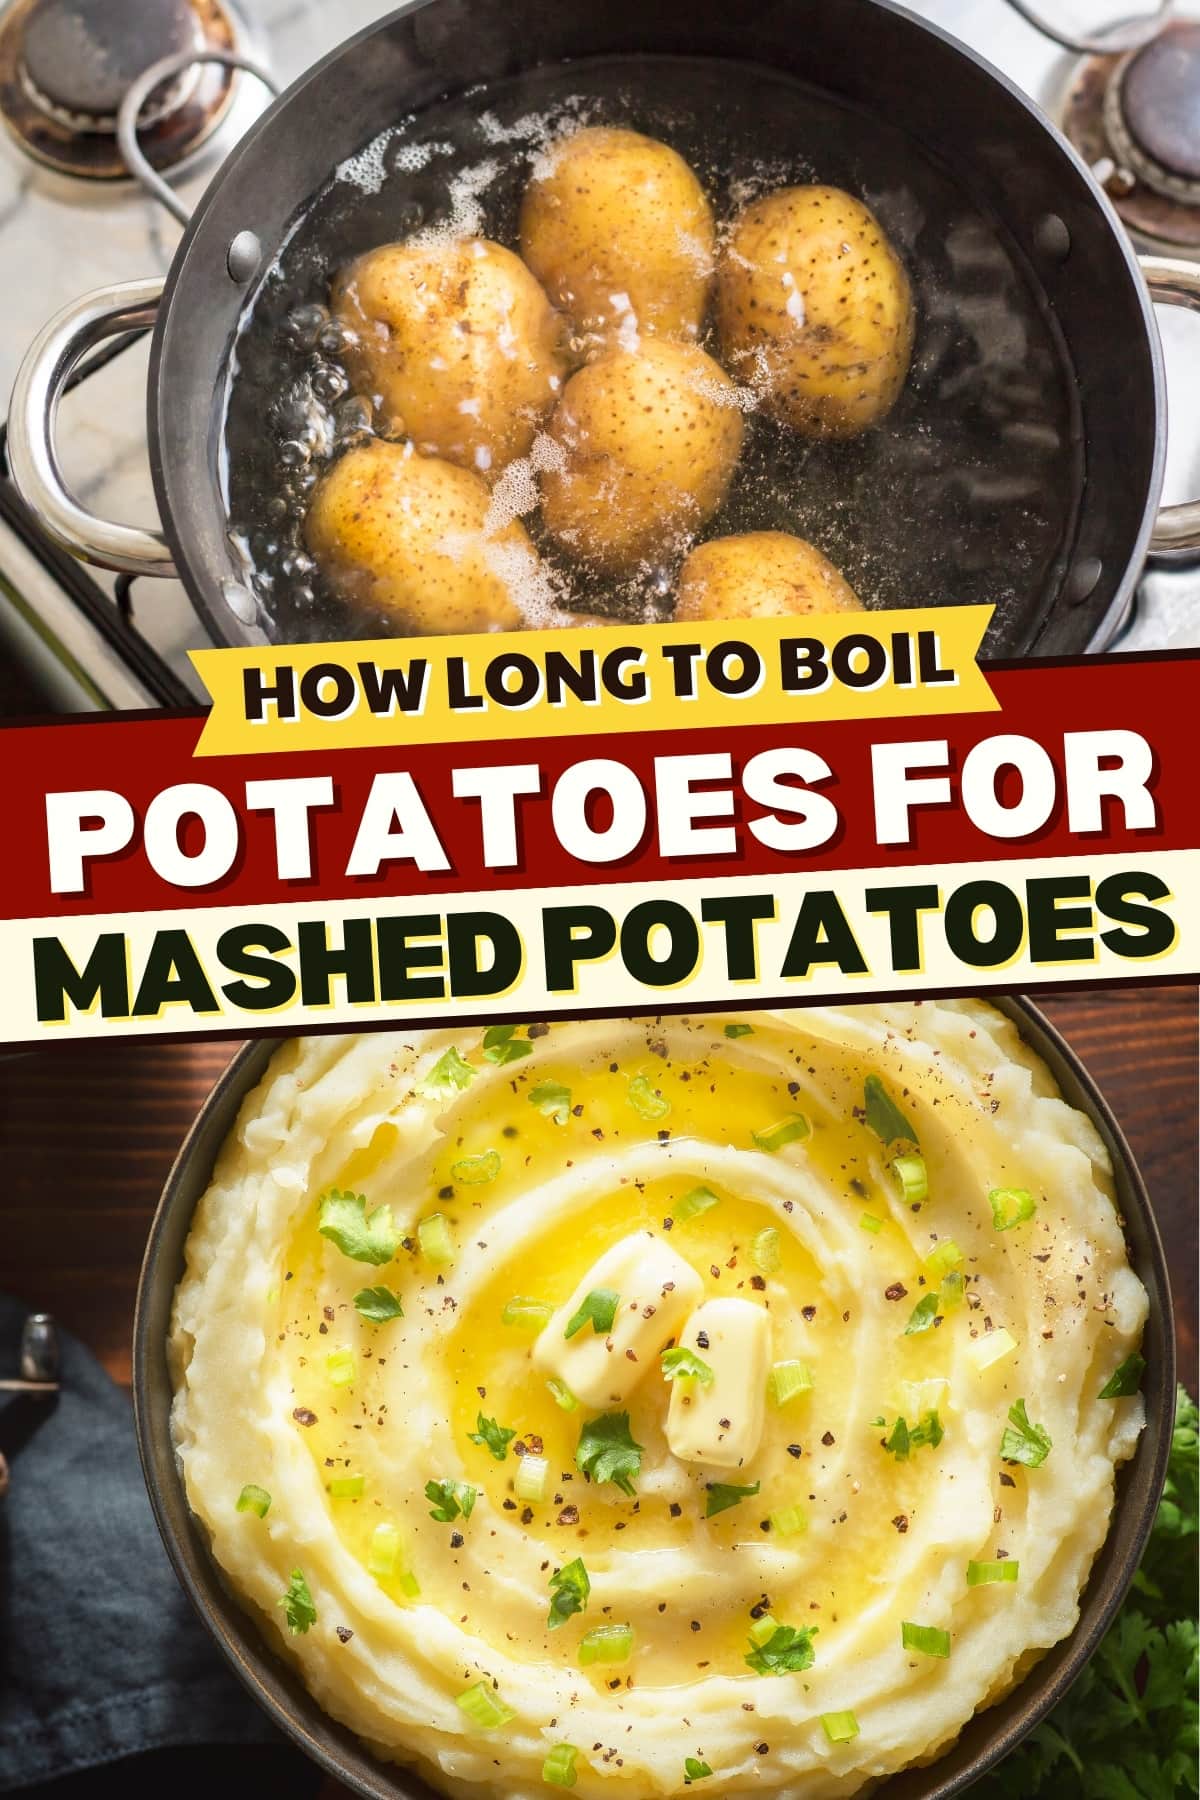 How Long to Boil Potatoes for Mashed Potatoes